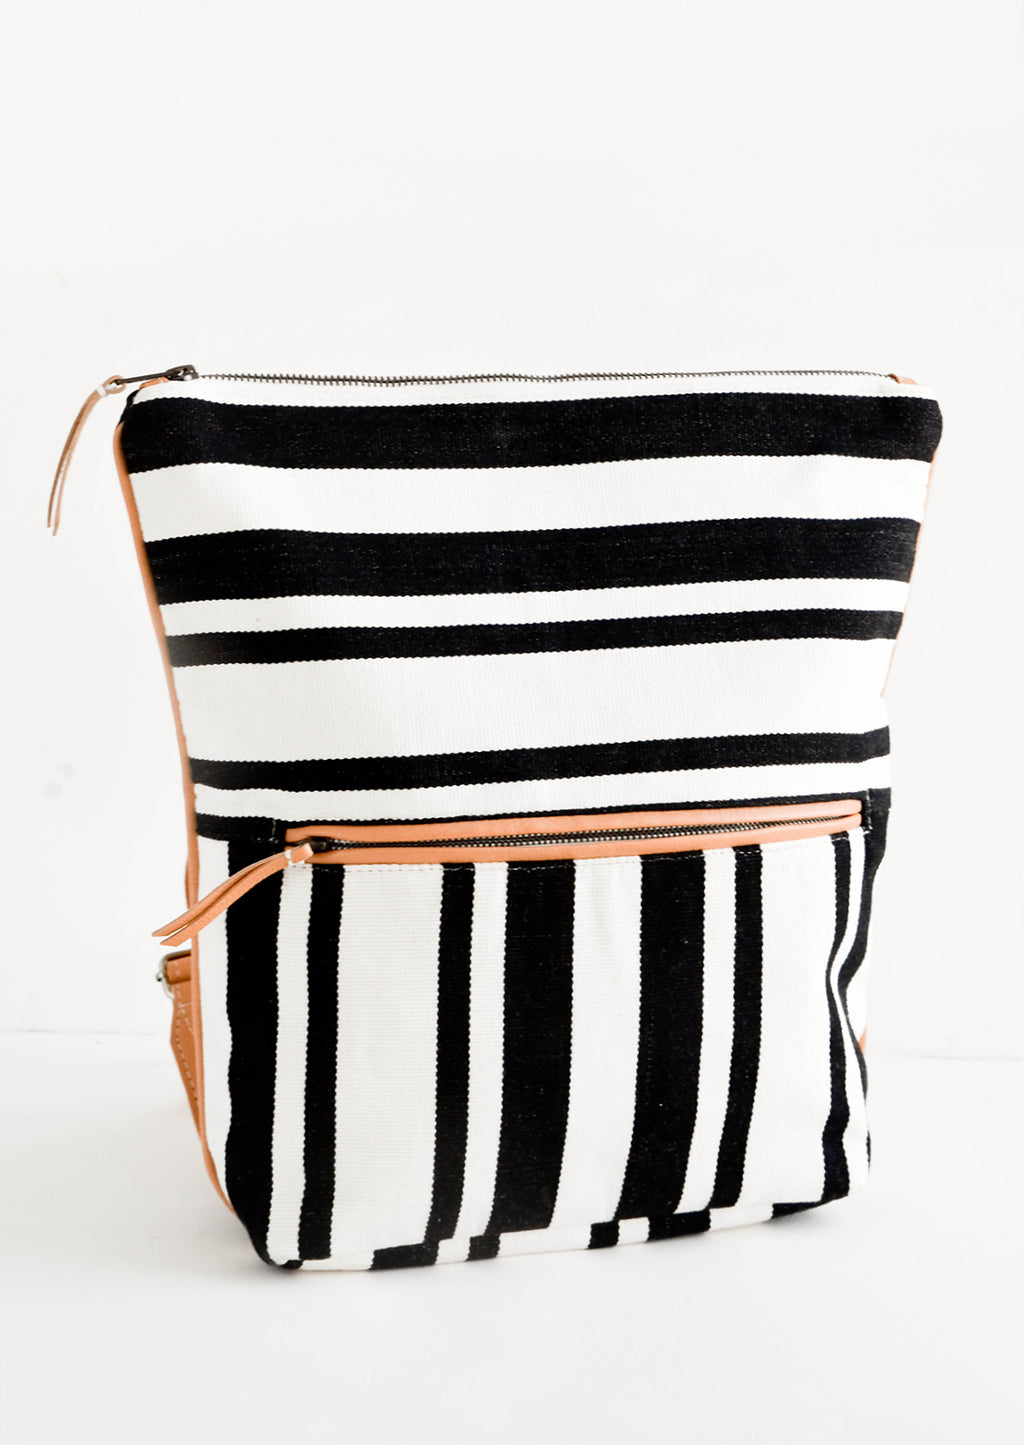 1: Fashion backpack in black and white striped cotton canvas with tan leather accents